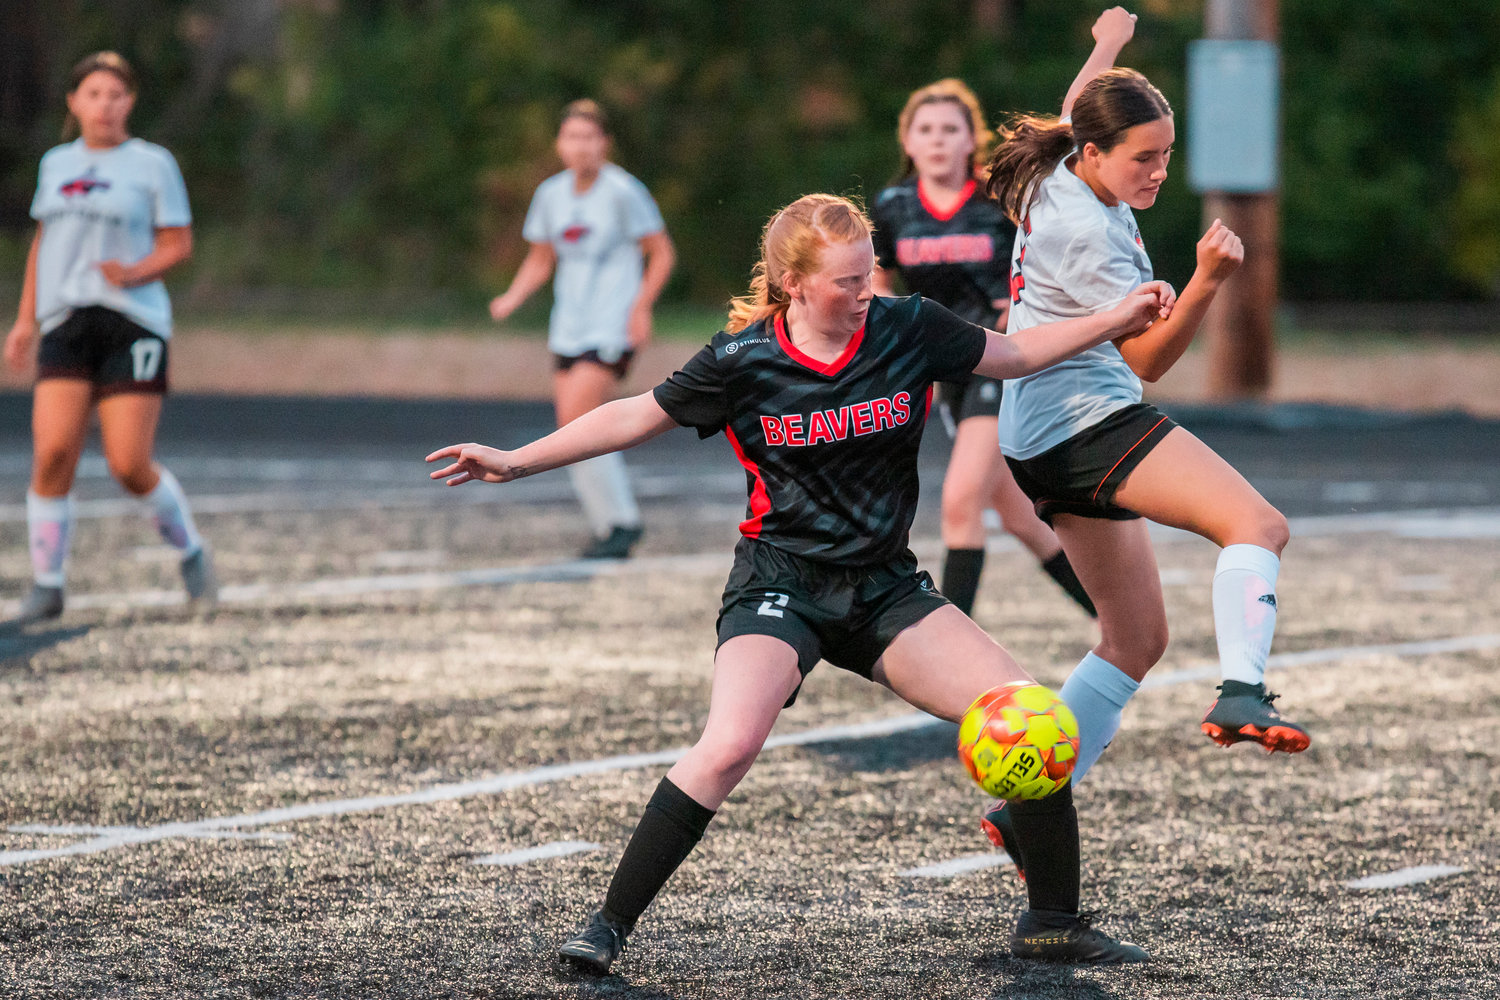 Tenino’s Abby Severse (2) fights for possession before taking the ball down to score Tuesday night at Beaver Stadium during a game against Centralia.